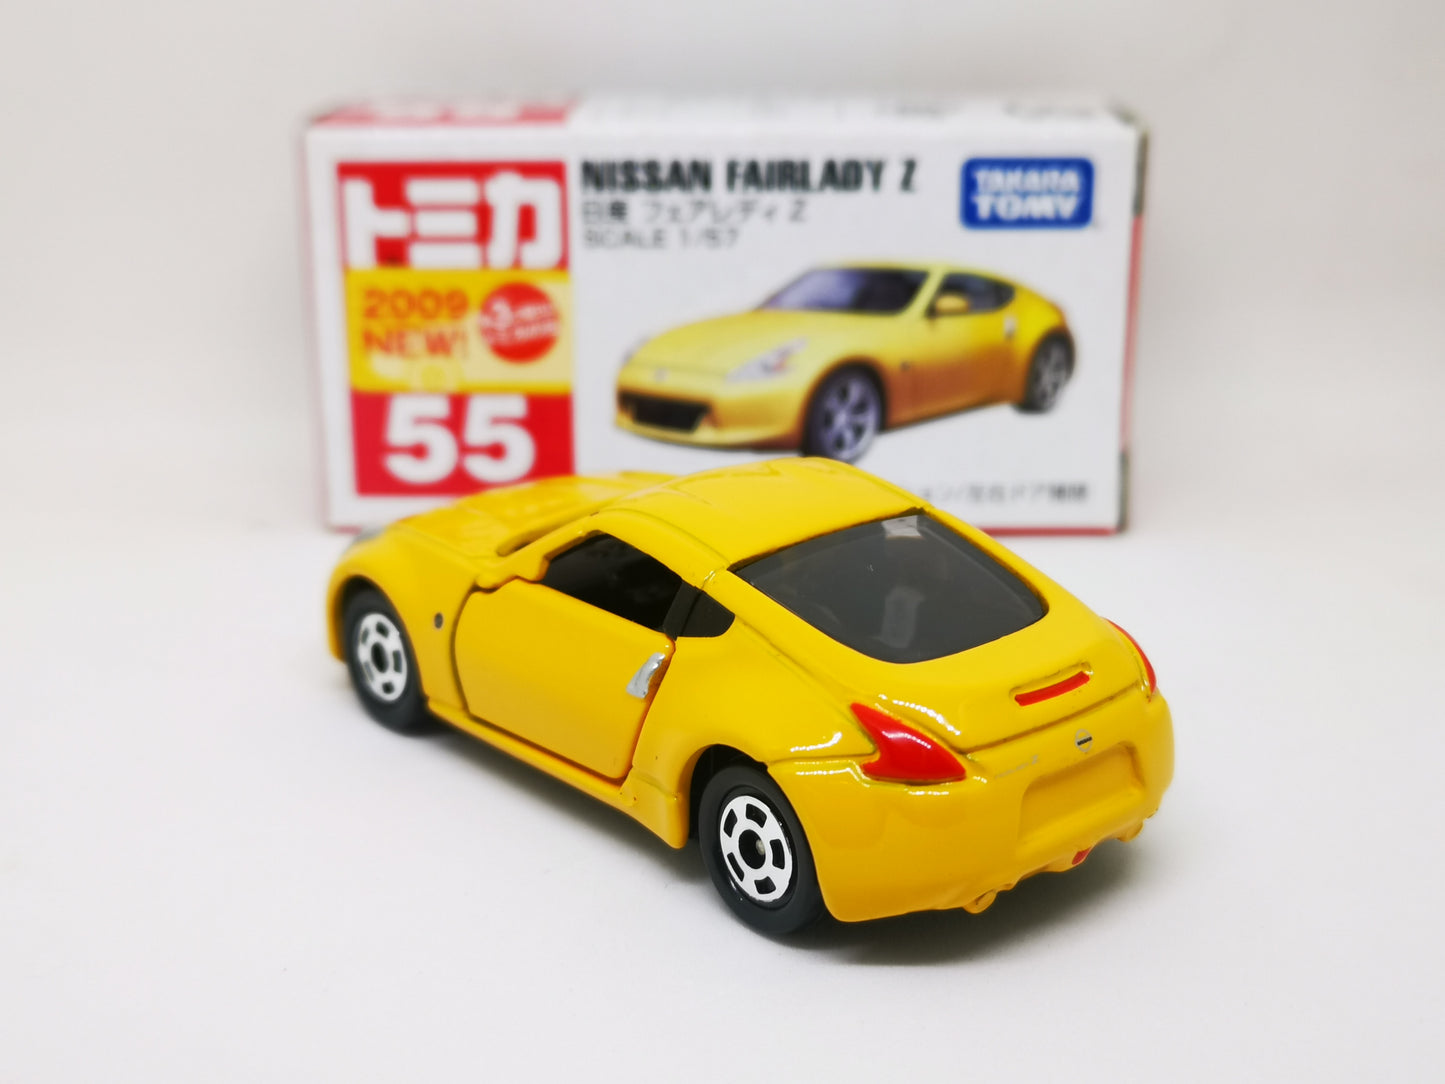 Tomica #55 Nissan Fairlady Z 2009 edition